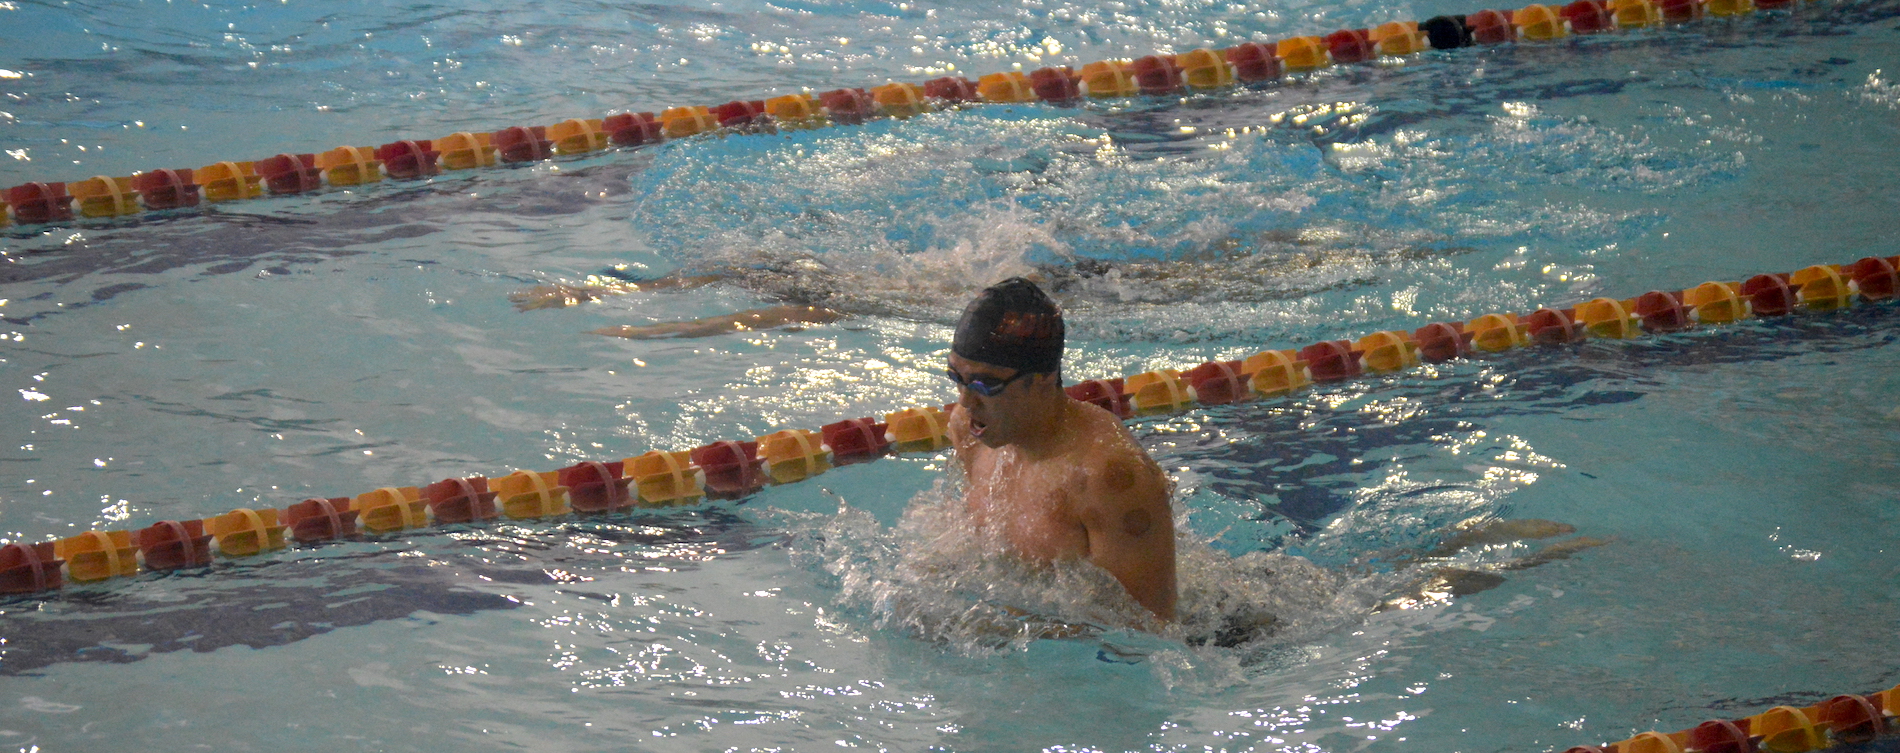 'Roo Men's Swimming Tops Centenary; Women Edged by Ladies